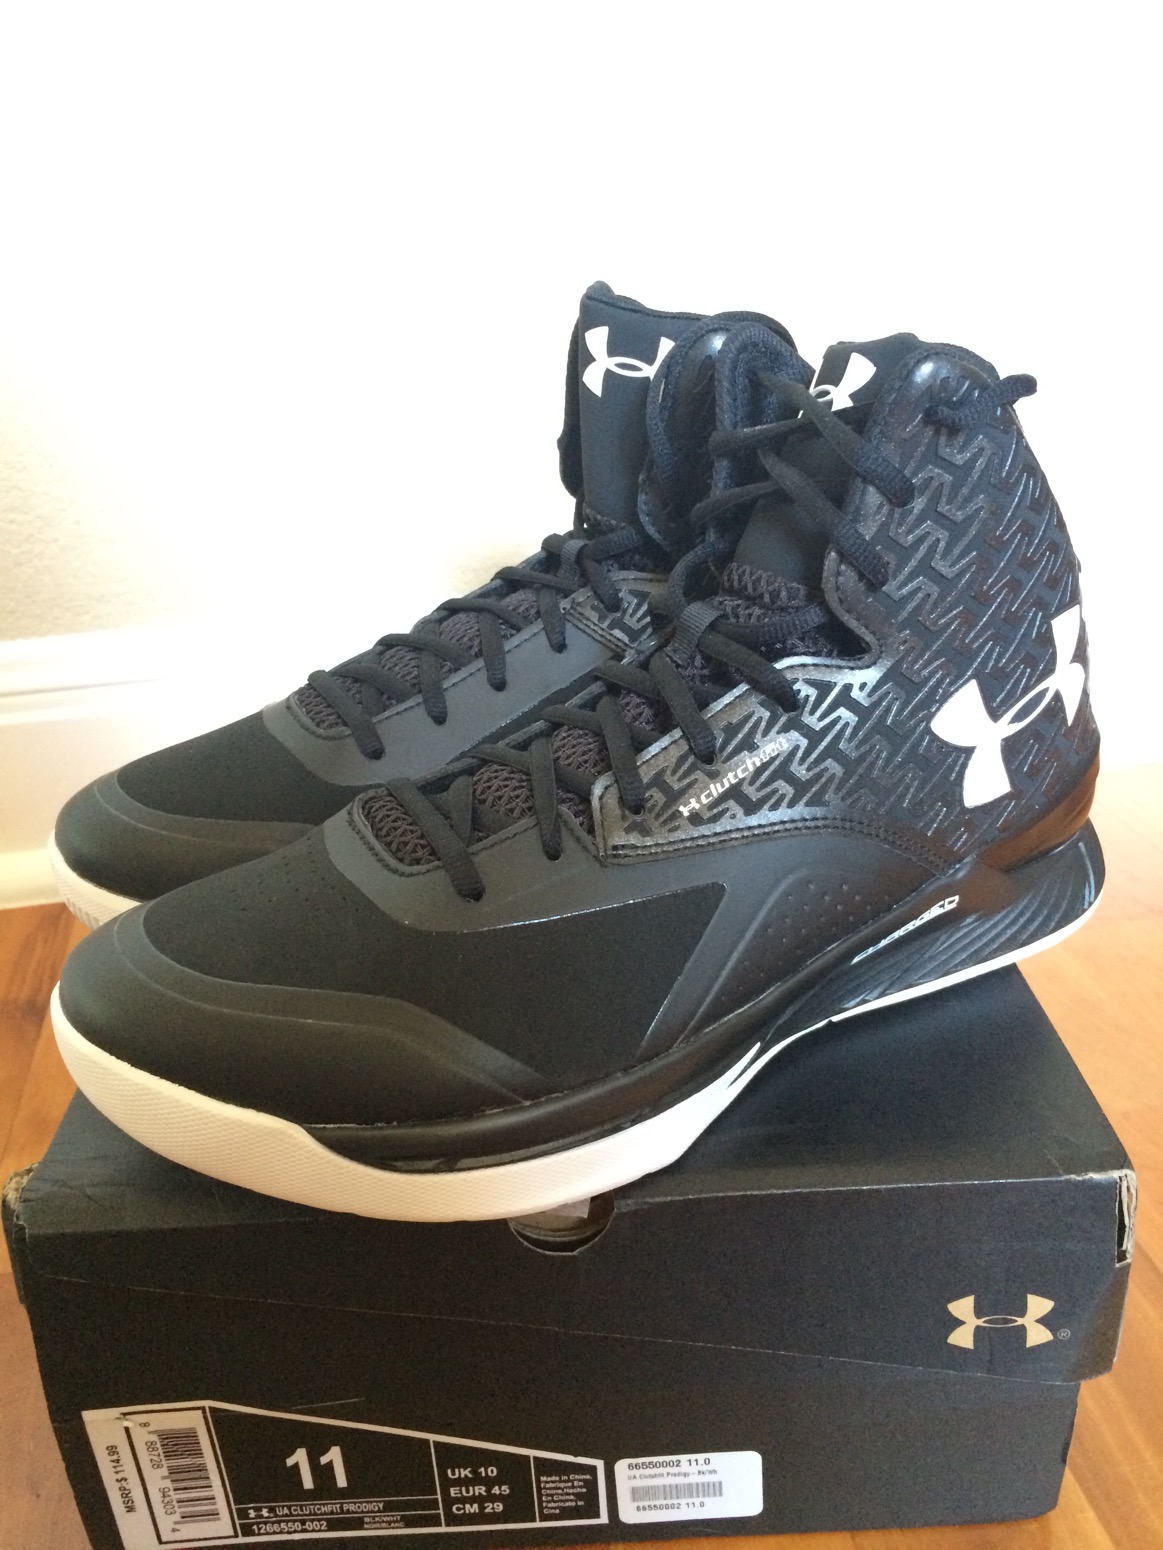 eastbay under armour basketball shoes